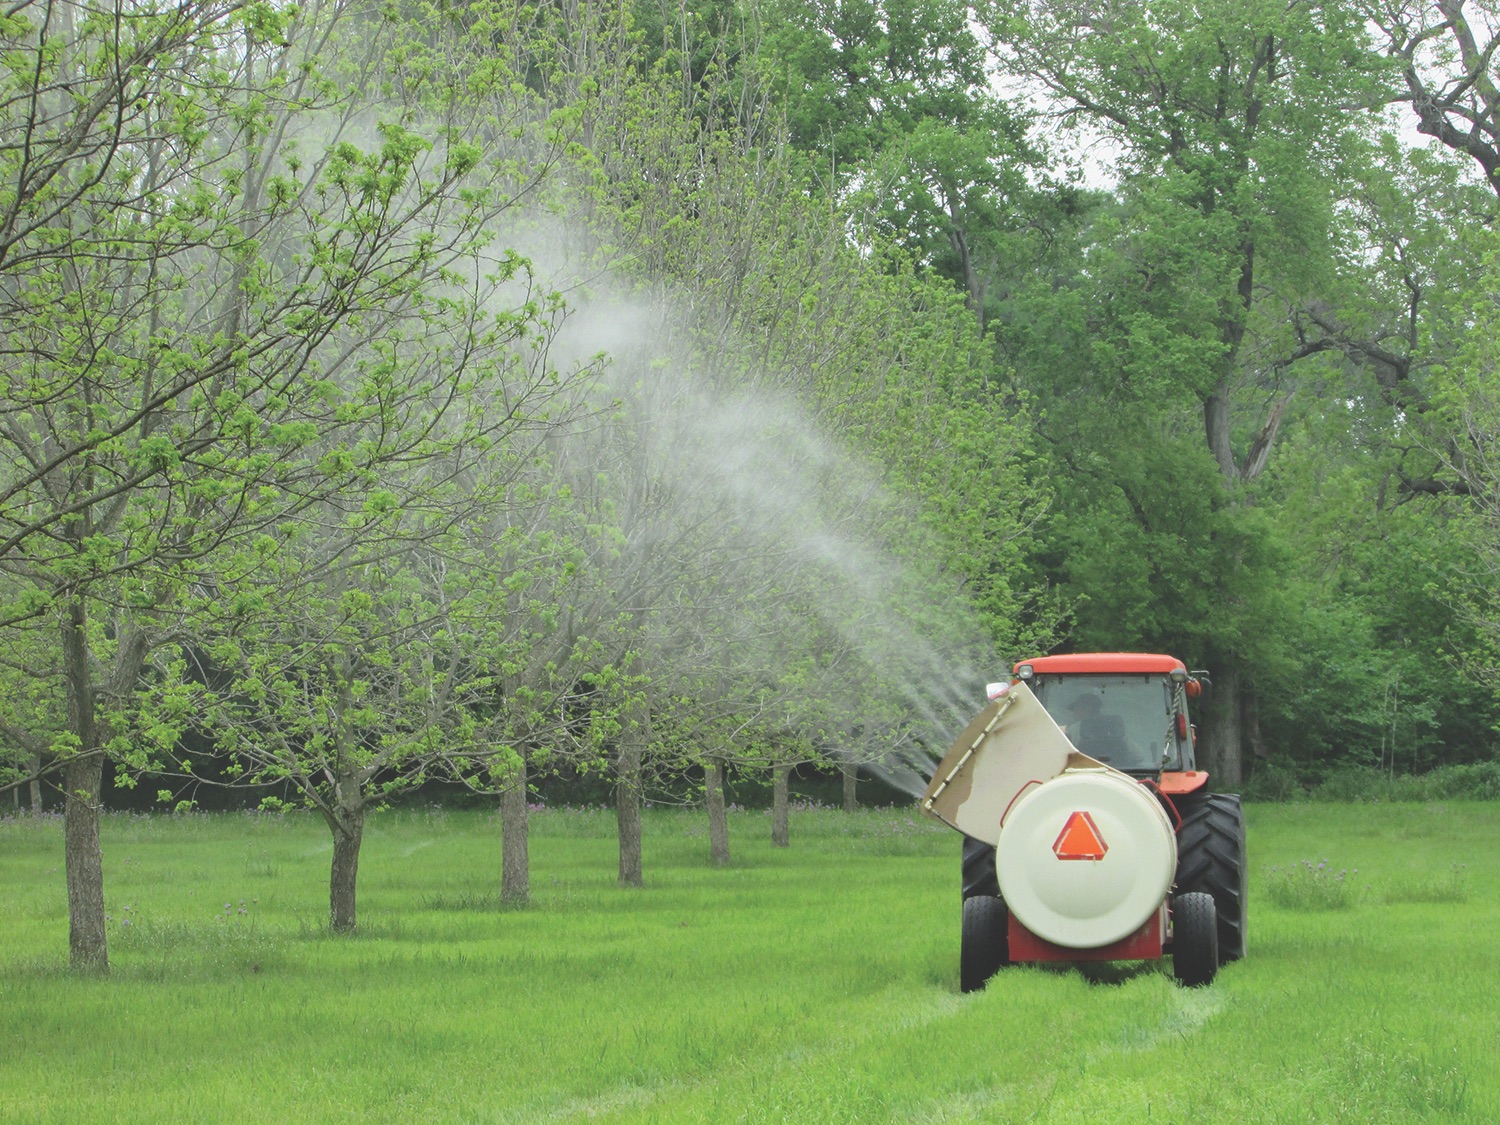 An airblast sprayer sprays young pecan trees in an orchard in Texas.